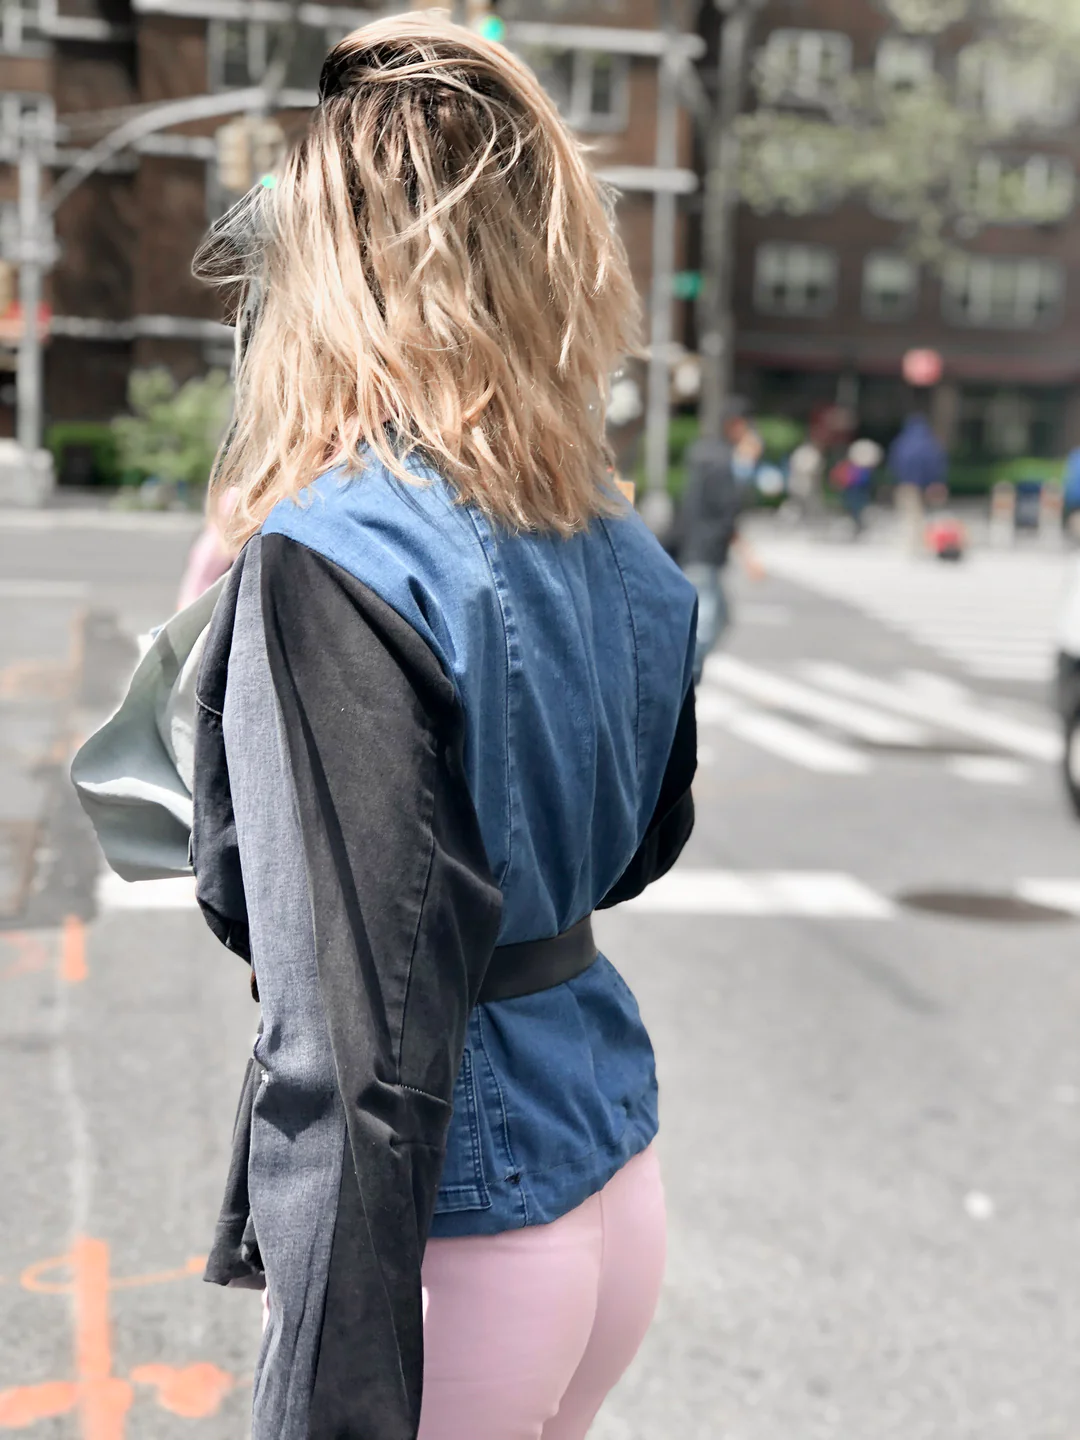 A woman in tights and an Up-Cycled Denim Jacket crossing the street.